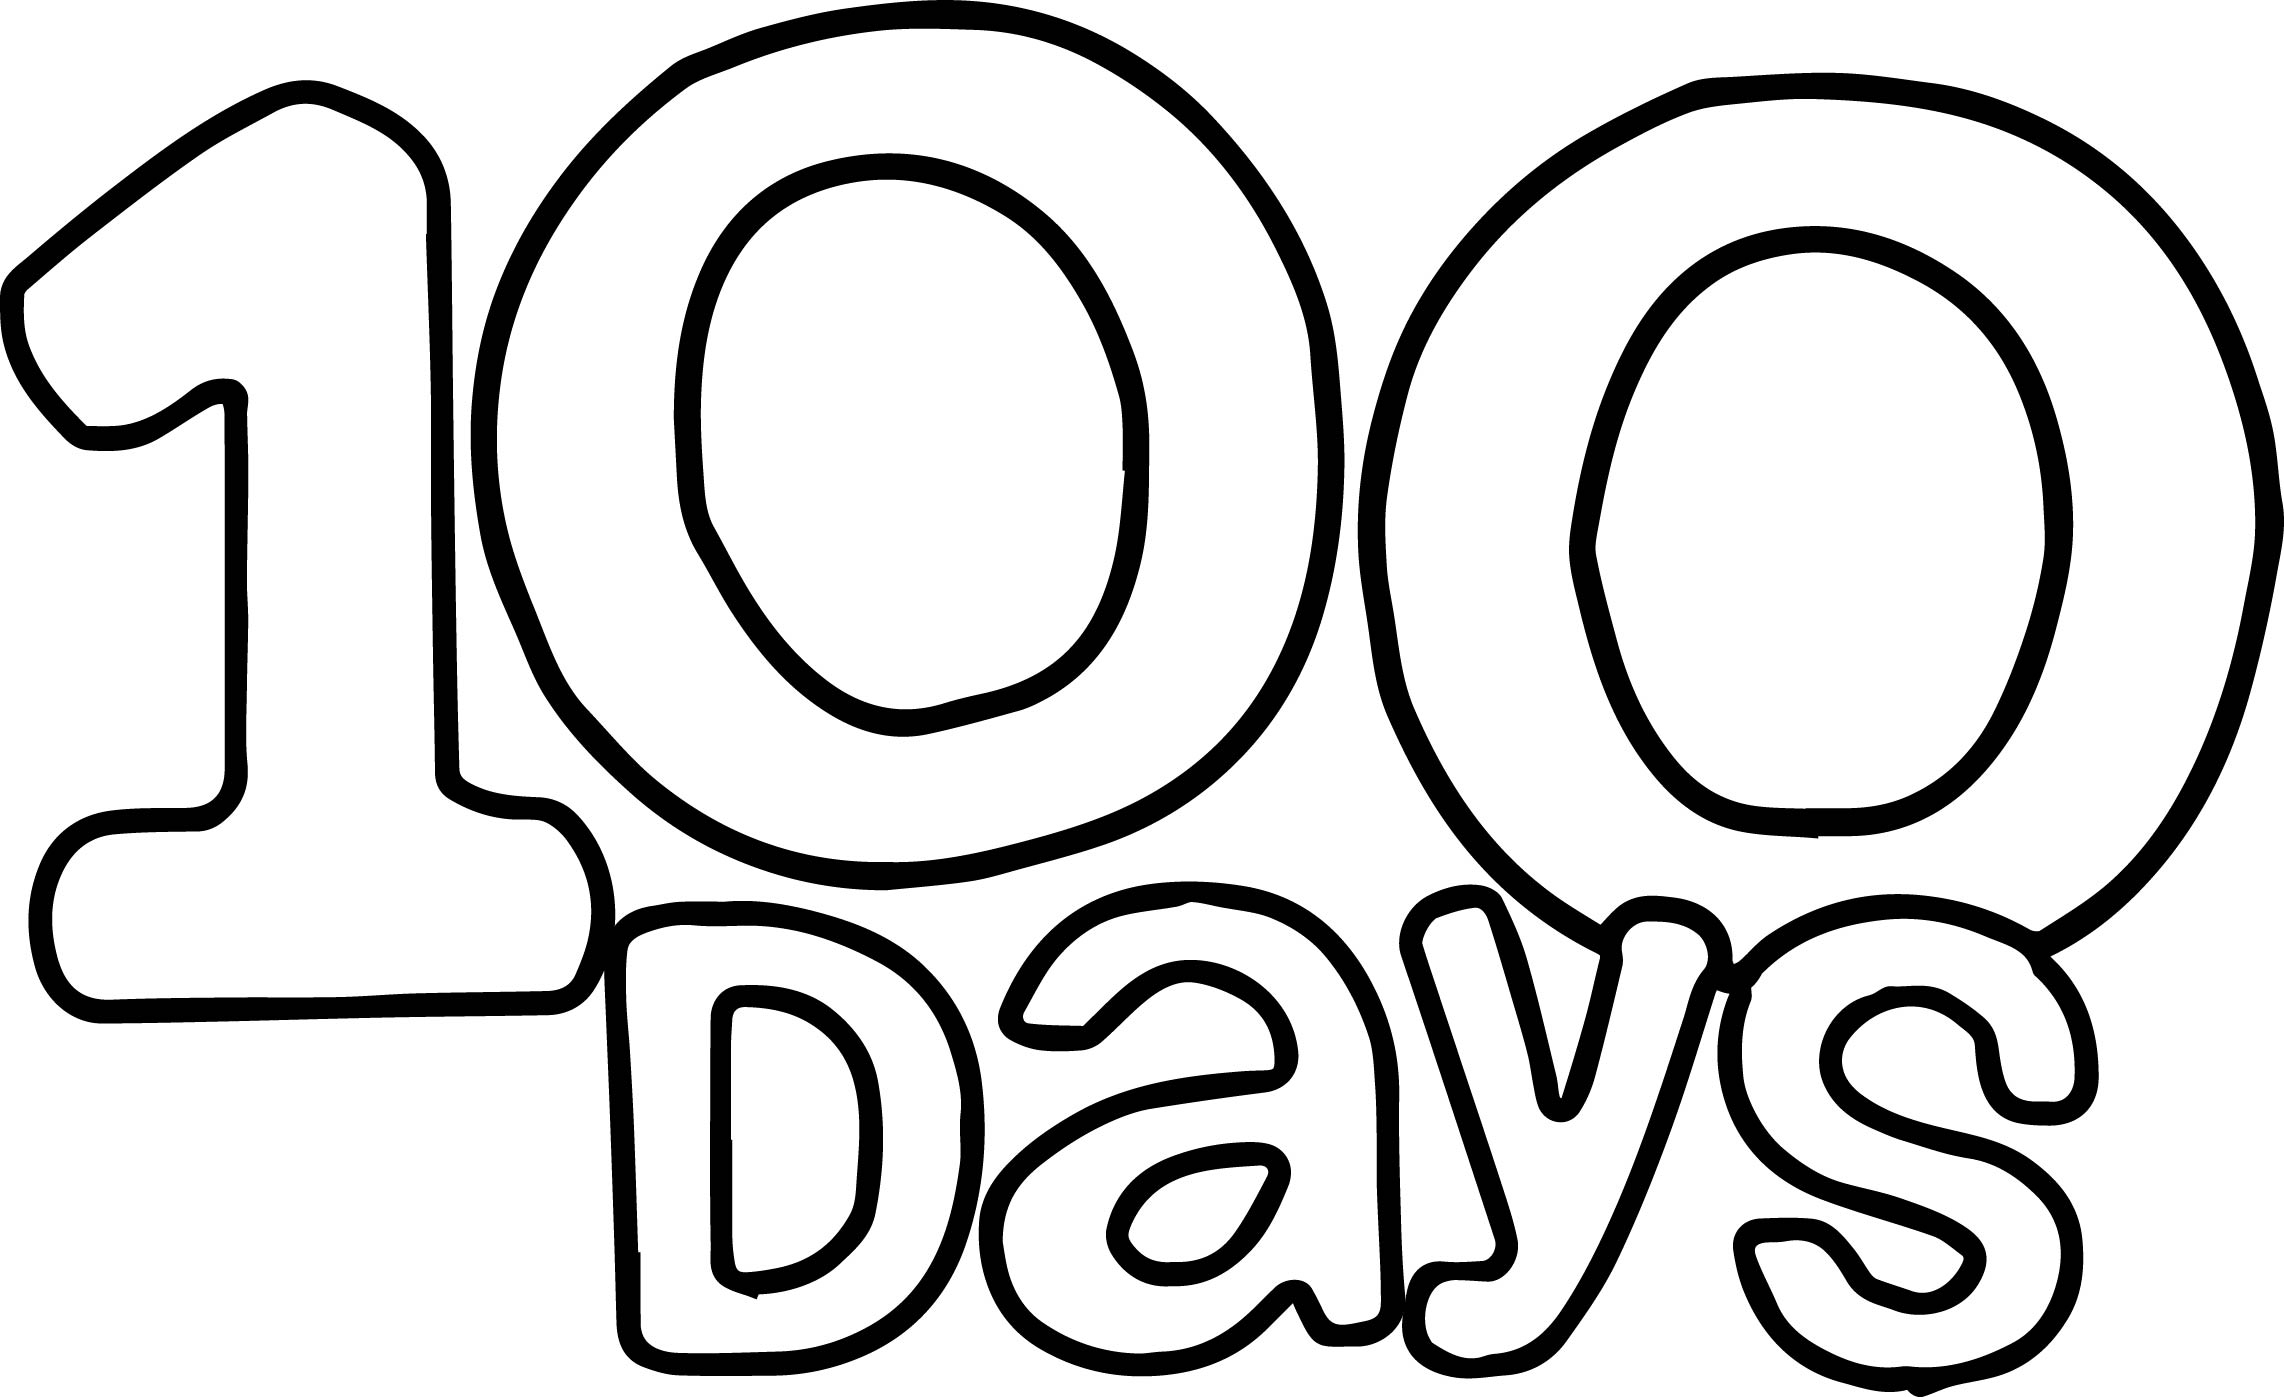 100Th Day Coloring Page Free Printable